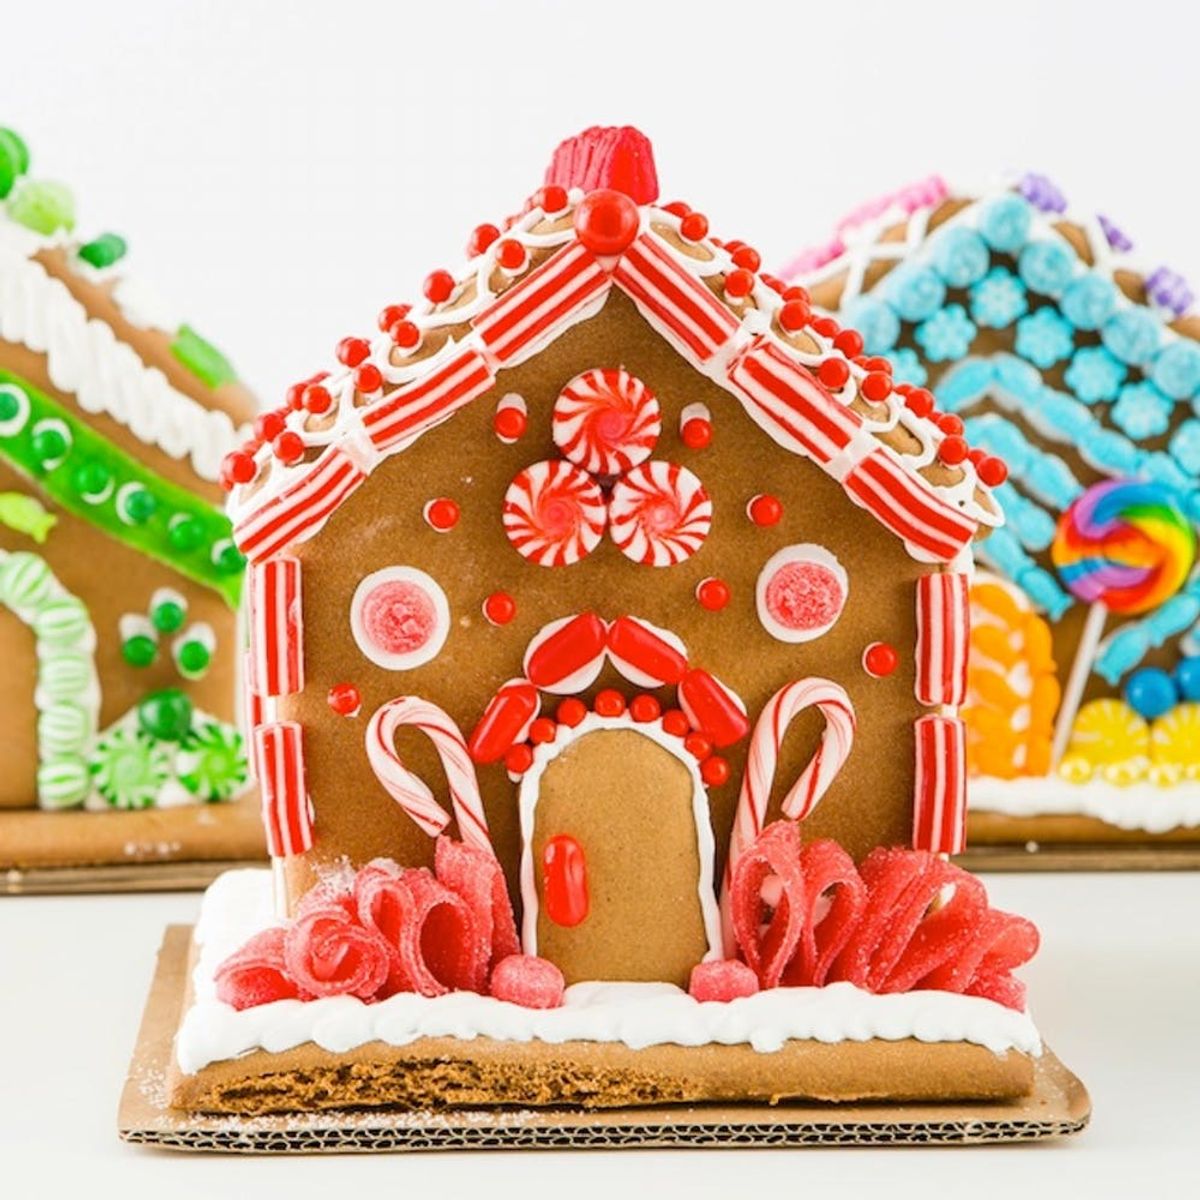 13 Gingerbread Houses Totally Worth the Sugar Coma